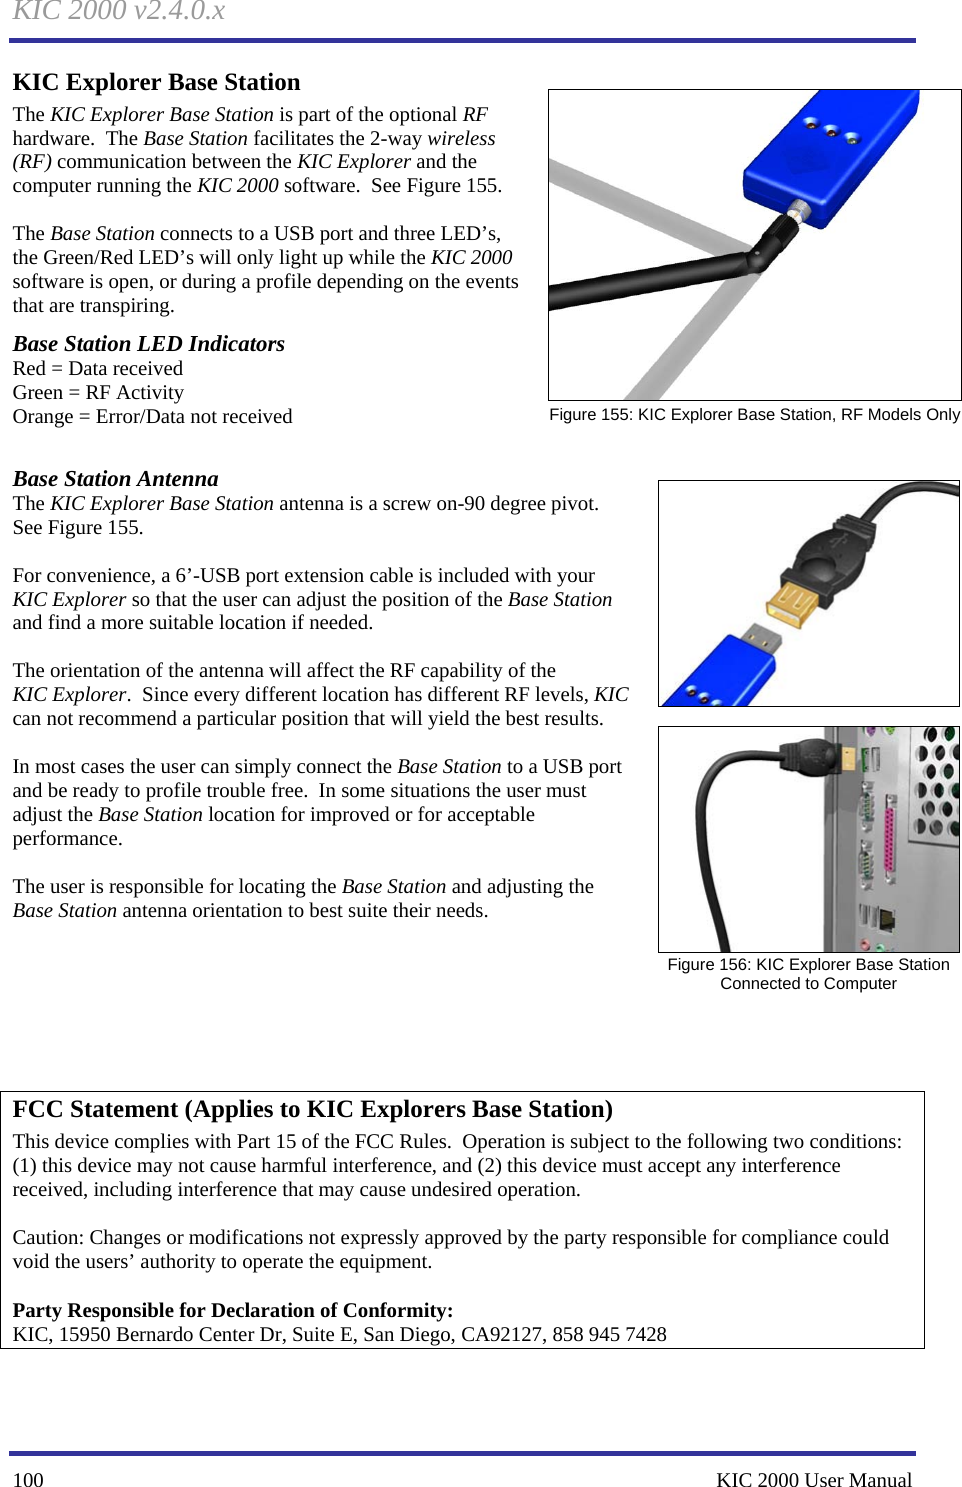 KIC 2000 v2.4.0.x 100    KIC 2000 User Manual KIC Explorer Base Station The KIC Explorer Base Station is part of the optional RF hardware.  The Base Station facilitates the 2-way wireless (RF) communication between the KIC Explorer and the computer running the KIC 2000 software.  See Figure 155.    The Base Station connects to a USB port and three LED’s, the Green/Red LED’s will only light up while the KIC 2000 software is open, or during a profile depending on the events that are transpiring.   Base Station LED Indicators Red = Data received Green = RF Activity Orange = Error/Data not received  Base Station Antenna The KIC Explorer Base Station antenna is a screw on-90 degree pivot. See Figure 155.   For convenience, a 6’-USB port extension cable is included with your KIC Explorer so that the user can adjust the position of the Base Station and find a more suitable location if needed.    The orientation of the antenna will affect the RF capability of the KIC Explorer.  Since every different location has different RF levels, KIC can not recommend a particular position that will yield the best results.    In most cases the user can simply connect the Base Station to a USB port and be ready to profile trouble free.  In some situations the user must adjust the Base Station location for improved or for acceptable performance.    The user is responsible for locating the Base Station and adjusting the Base Station antenna orientation to best suite their needs.         FCC Statement (Applies to KIC Explorers Base Station) This device complies with Part 15 of the FCC Rules.  Operation is subject to the following two conditions: (1) this device may not cause harmful interference, and (2) this device must accept any interference received, including interference that may cause undesired operation.    Caution: Changes or modifications not expressly approved by the party responsible for compliance could void the users’ authority to operate the equipment.   Party Responsible for Declaration of Conformity: KIC, 15950 Bernardo Center Dr, Suite E, San Diego, CA92127, 858 945 7428   Figure 155: KIC Explorer Base Station, RF Models Only    Figure 156: KIC Explorer Base Station Connected to Computer 